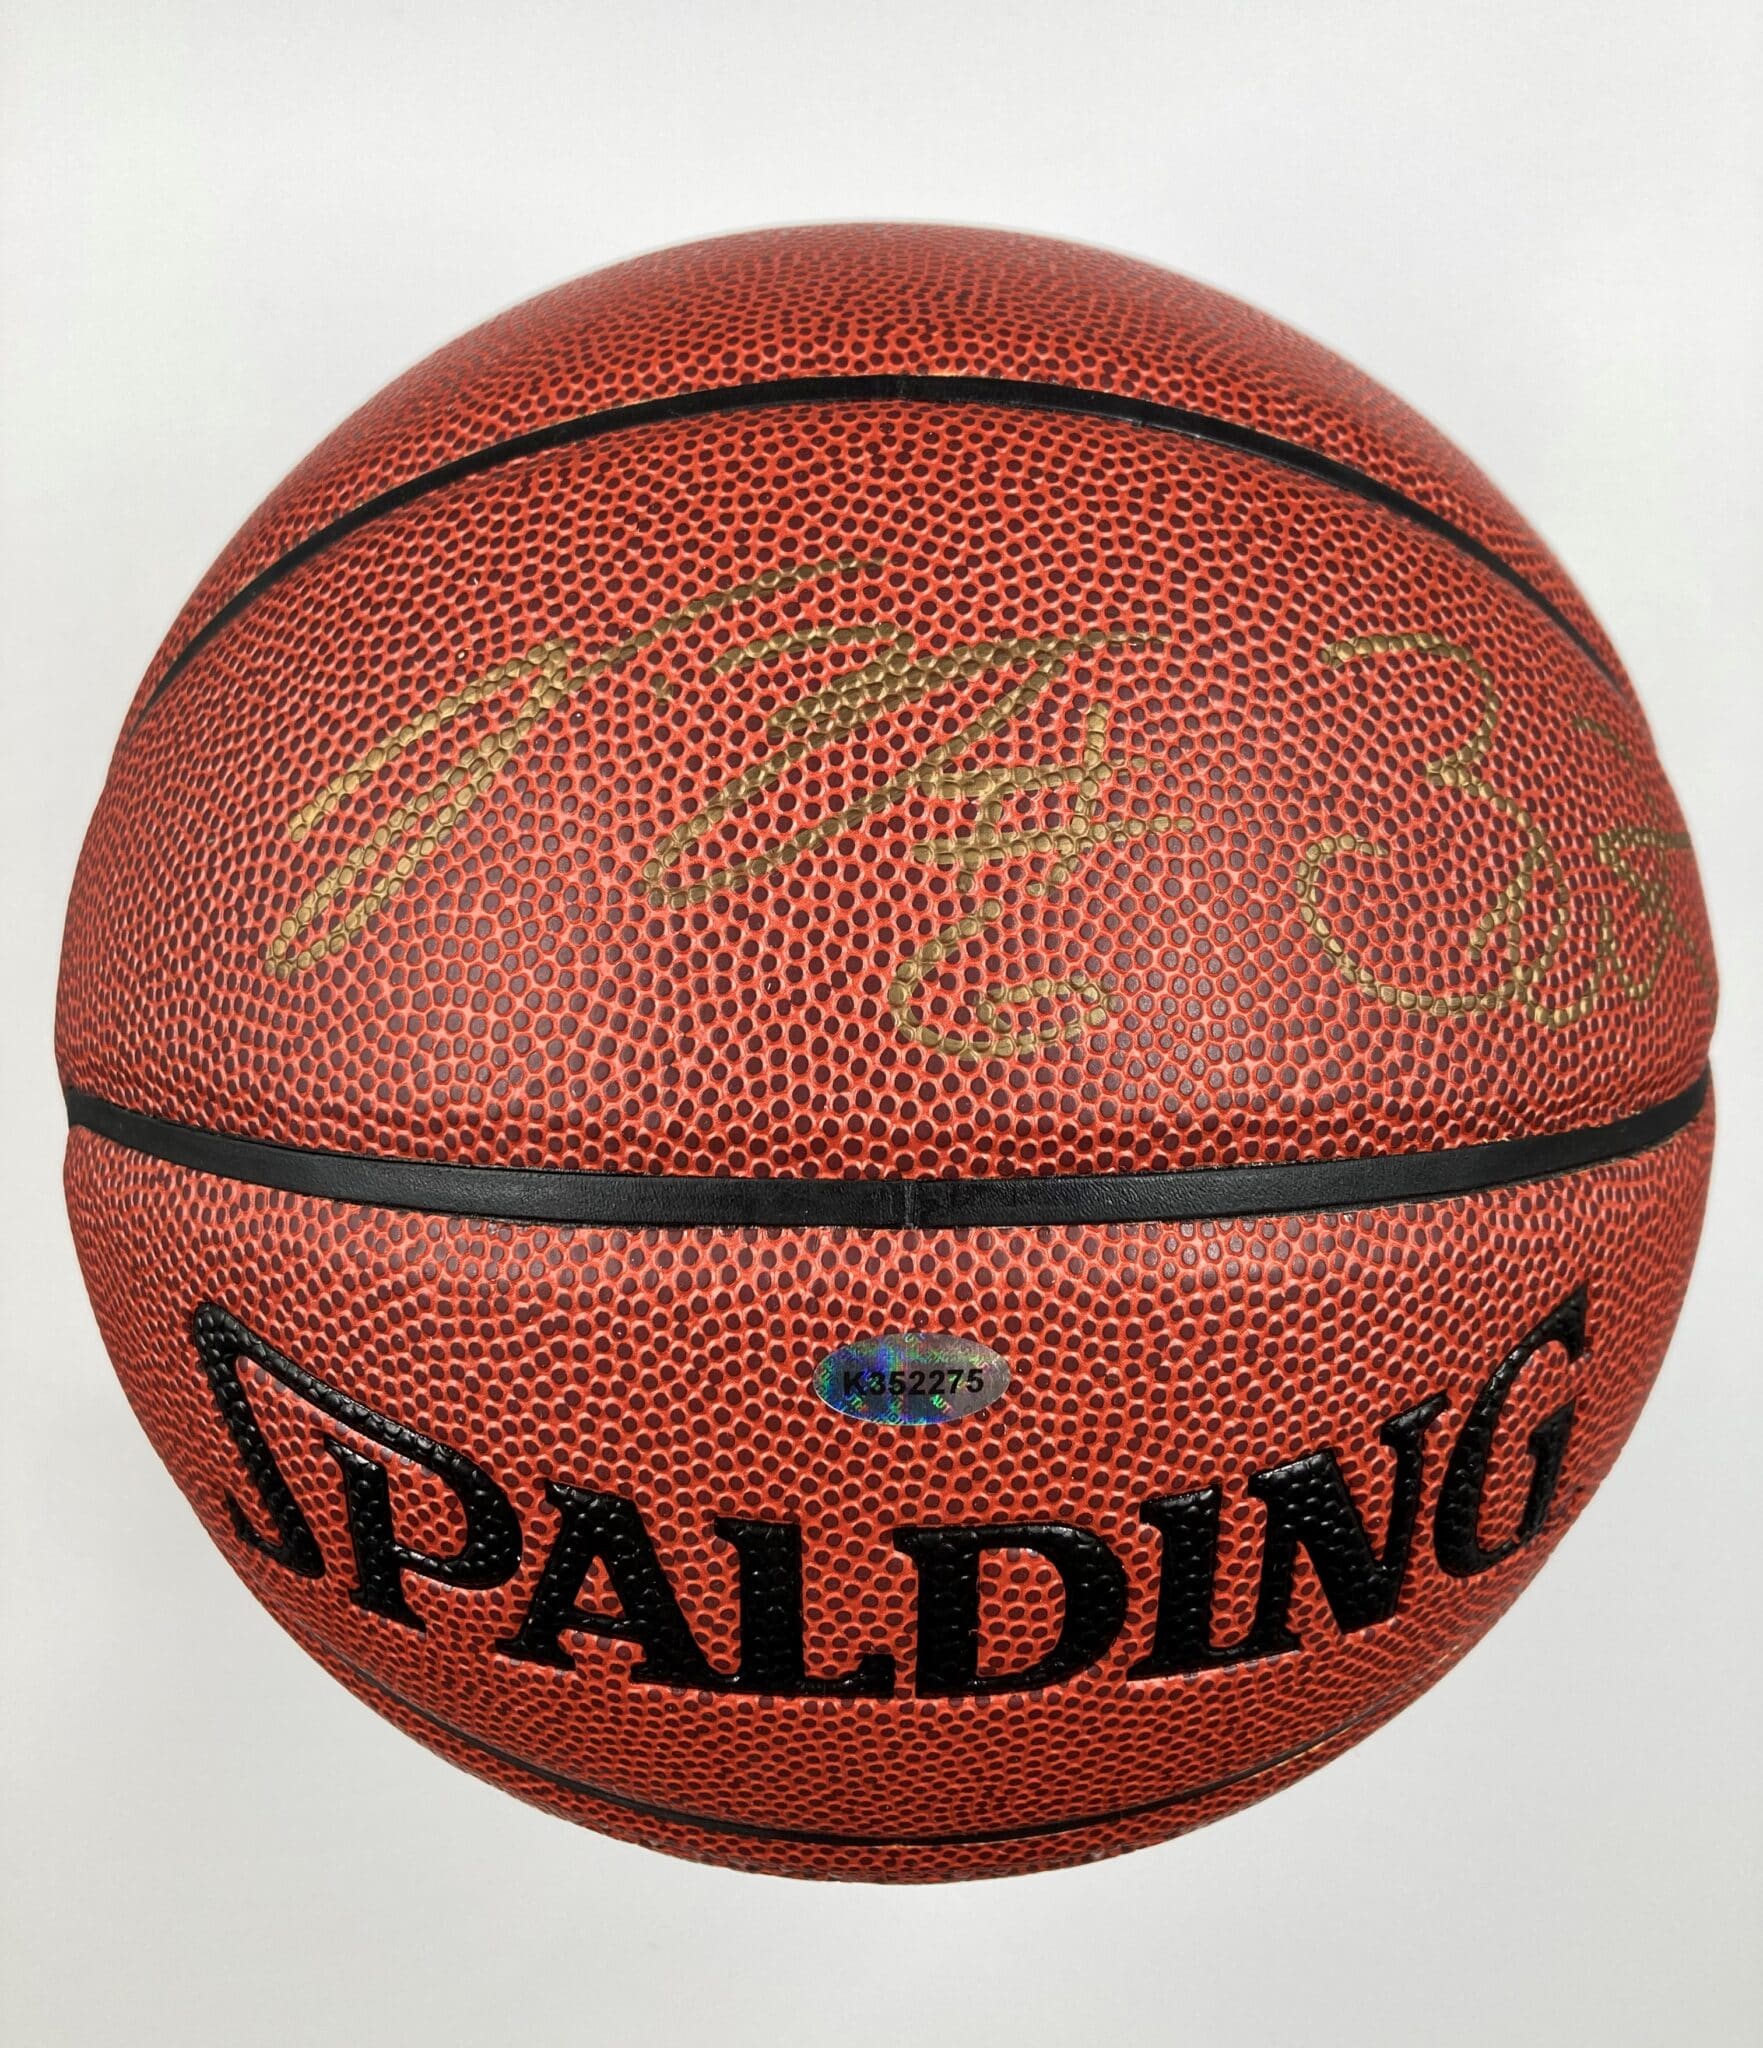 LeBron James Dwyane Wade Miami Heat Authentic Signed Brown Spalding Basketball w Golden Signature K 352275 1